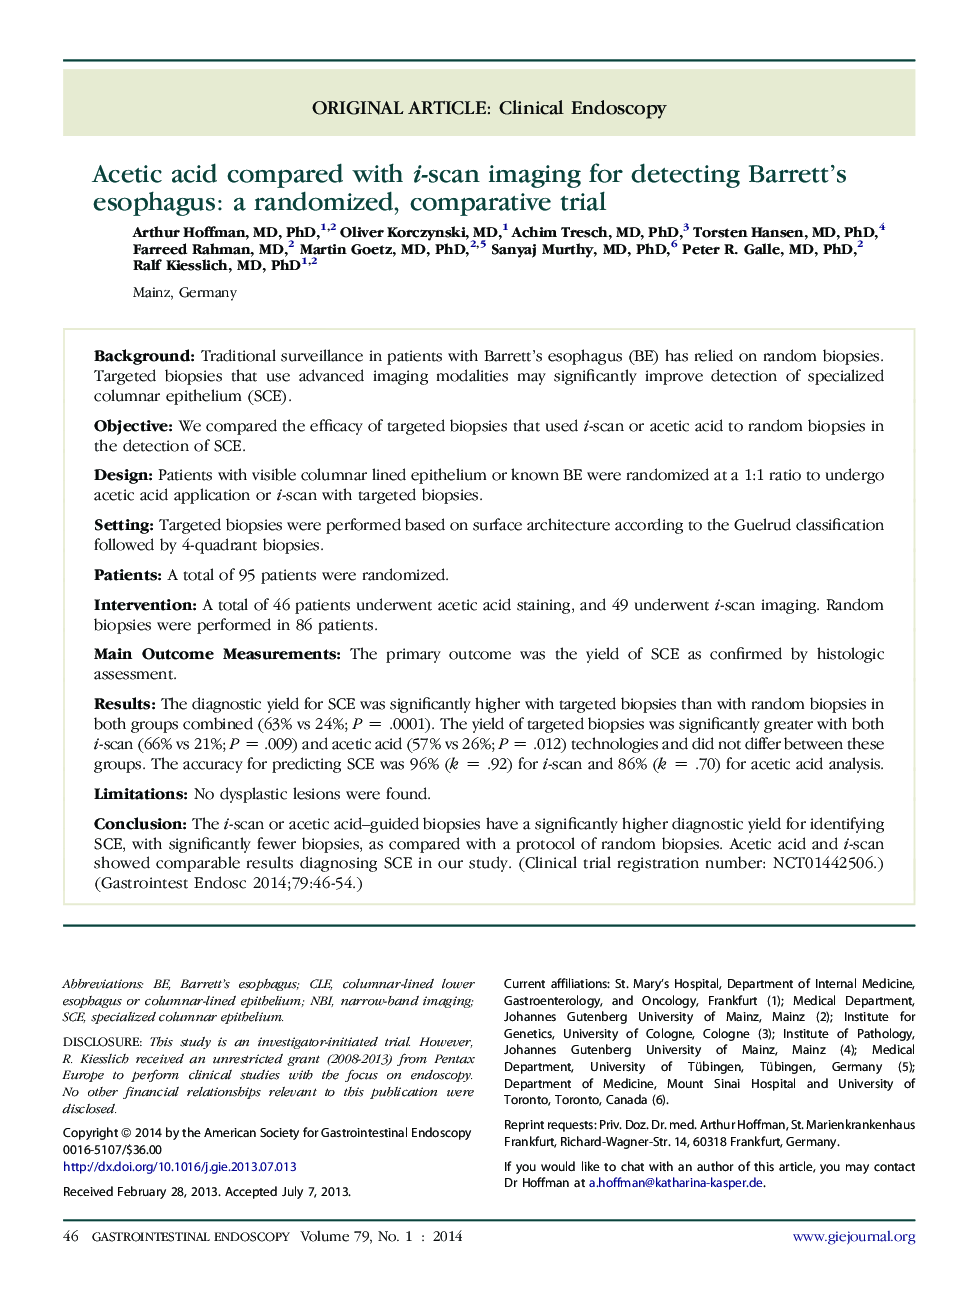 Acetic acid compared with i-scan imaging for detecting Barrett’s esophagus: a randomized, comparative trial 